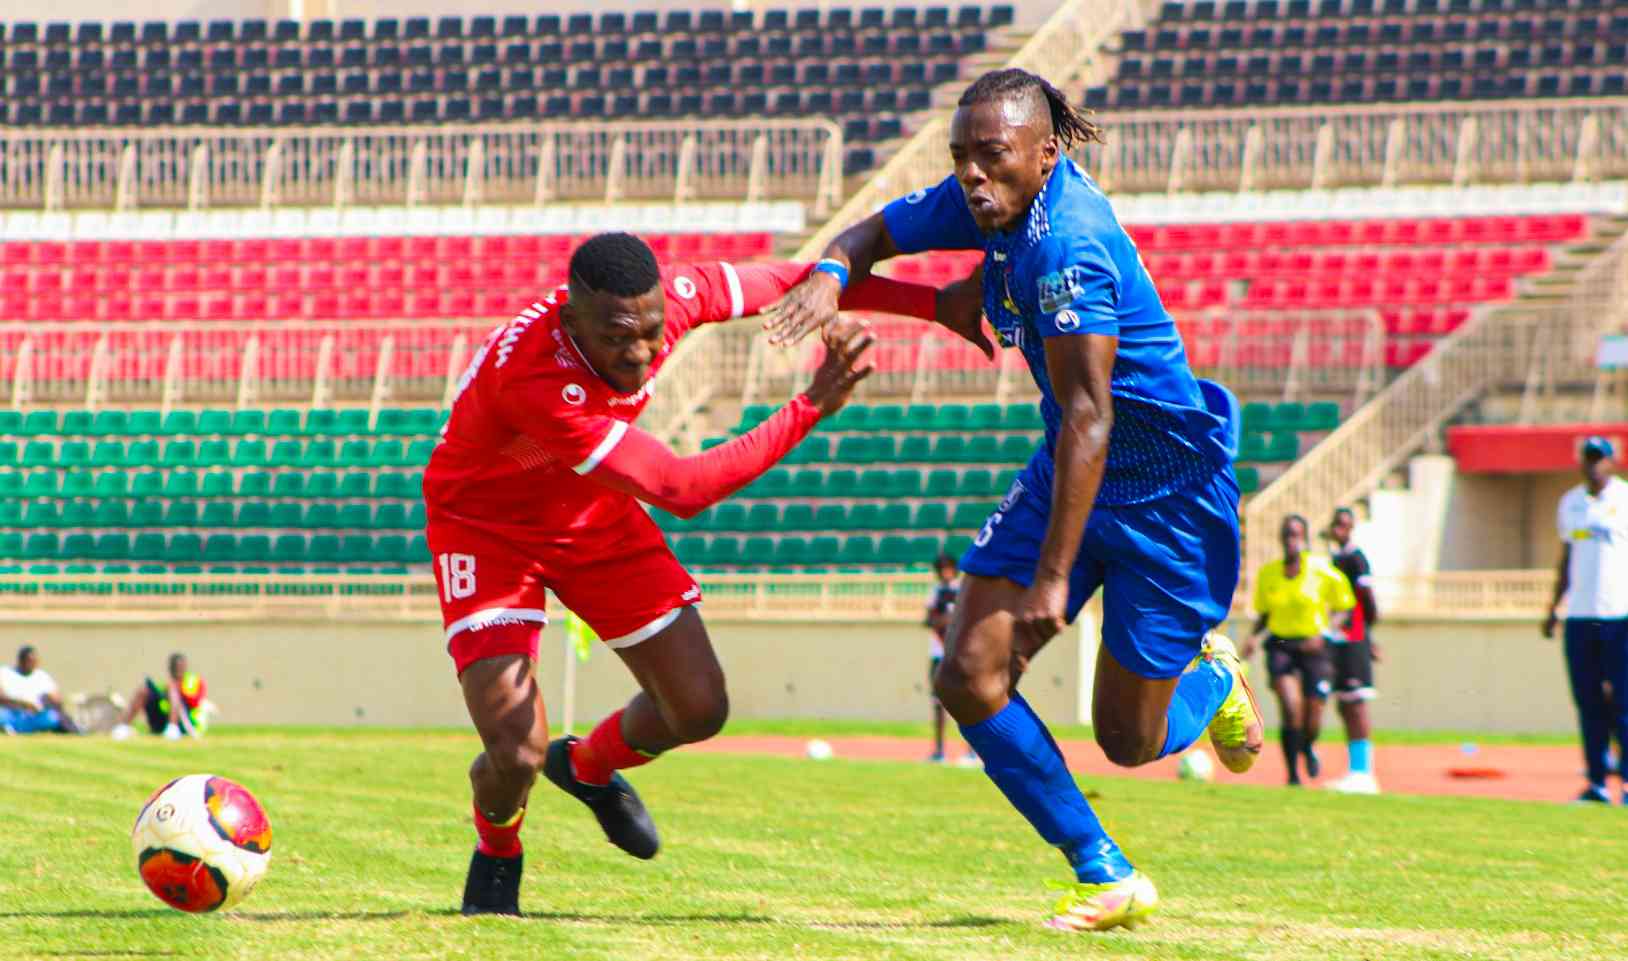 Kenya Police and Ulinzi Stars 'Disciplined Forces Derby' ends in draw again